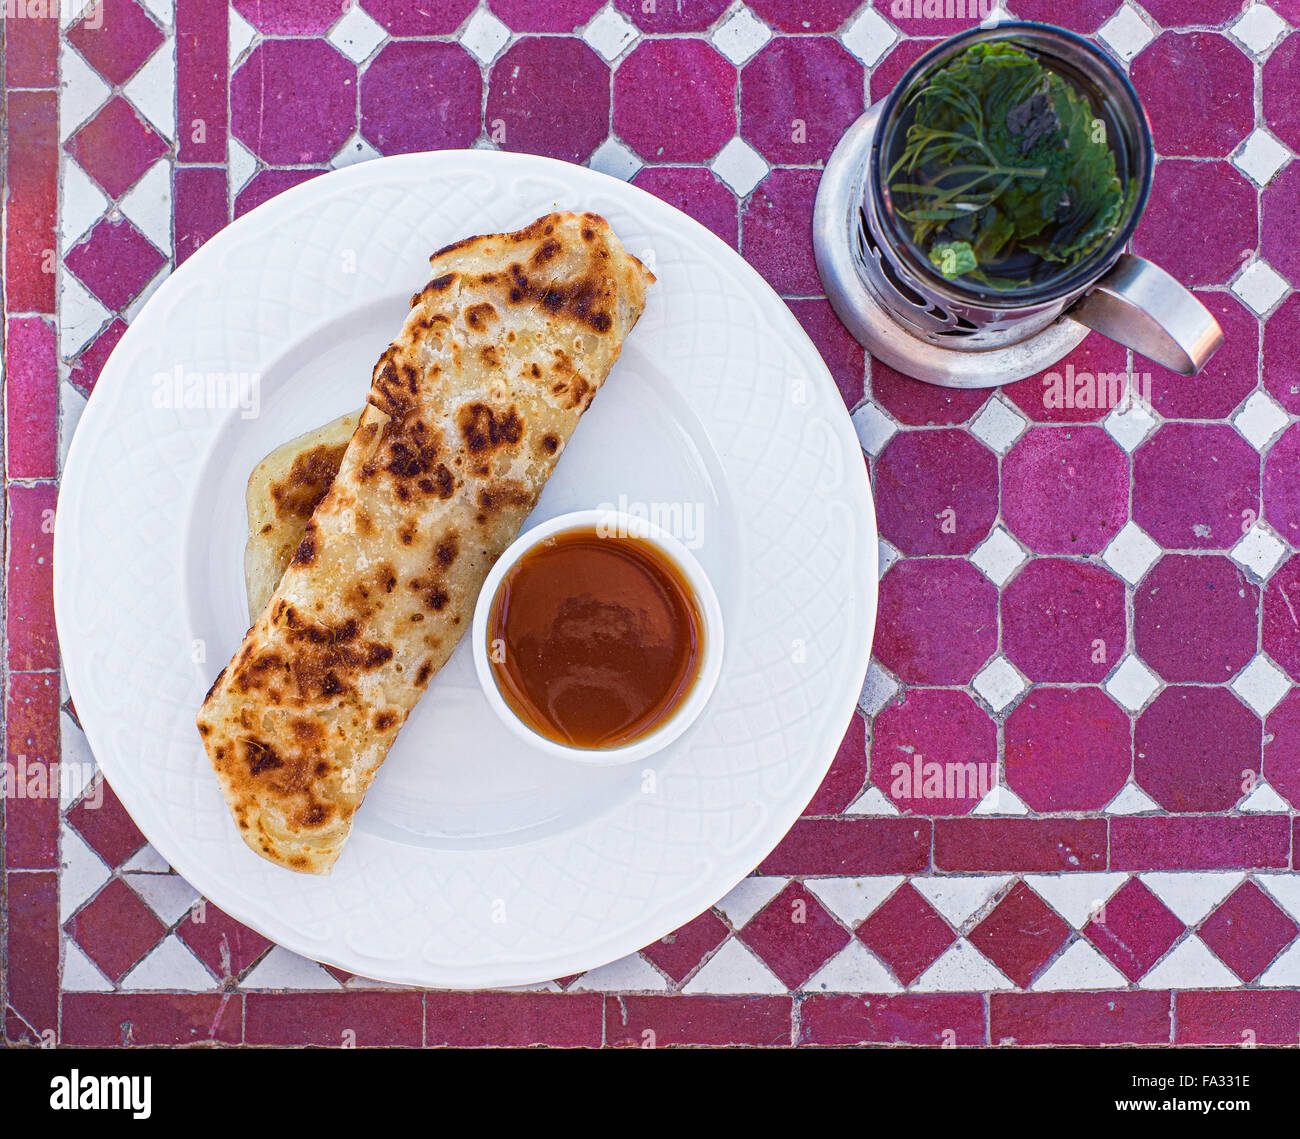 Msemen or Rghaif is a typical kitchen maghreb Berber flatbread. Typical moroccan breakfast, Msemen with honey and Moroccan tea Stock Photo